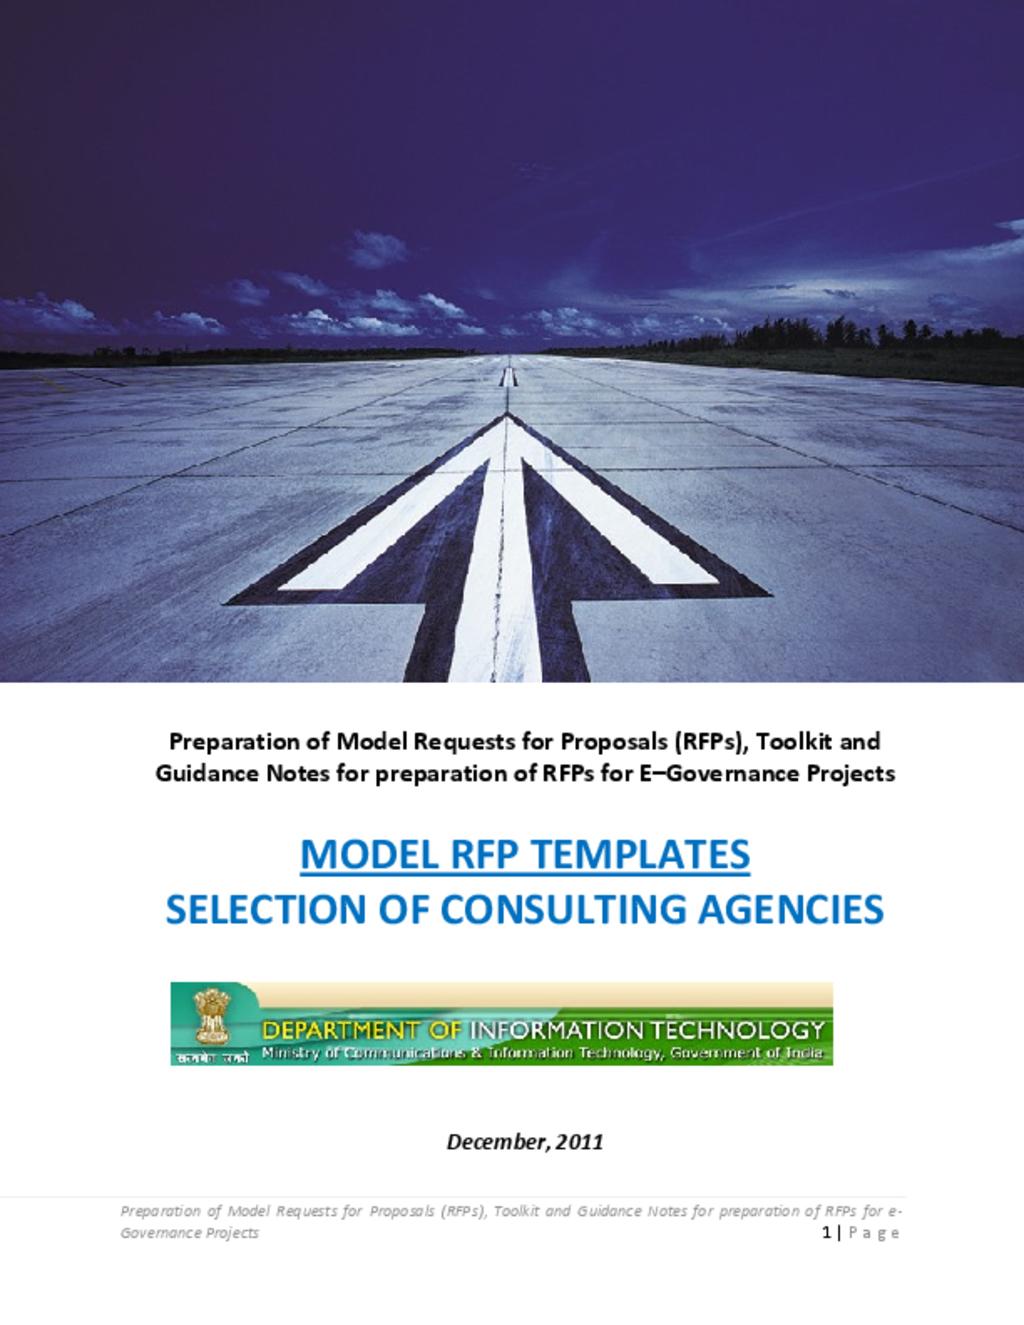 Model RFP Templates Selection of Consulting Agencies